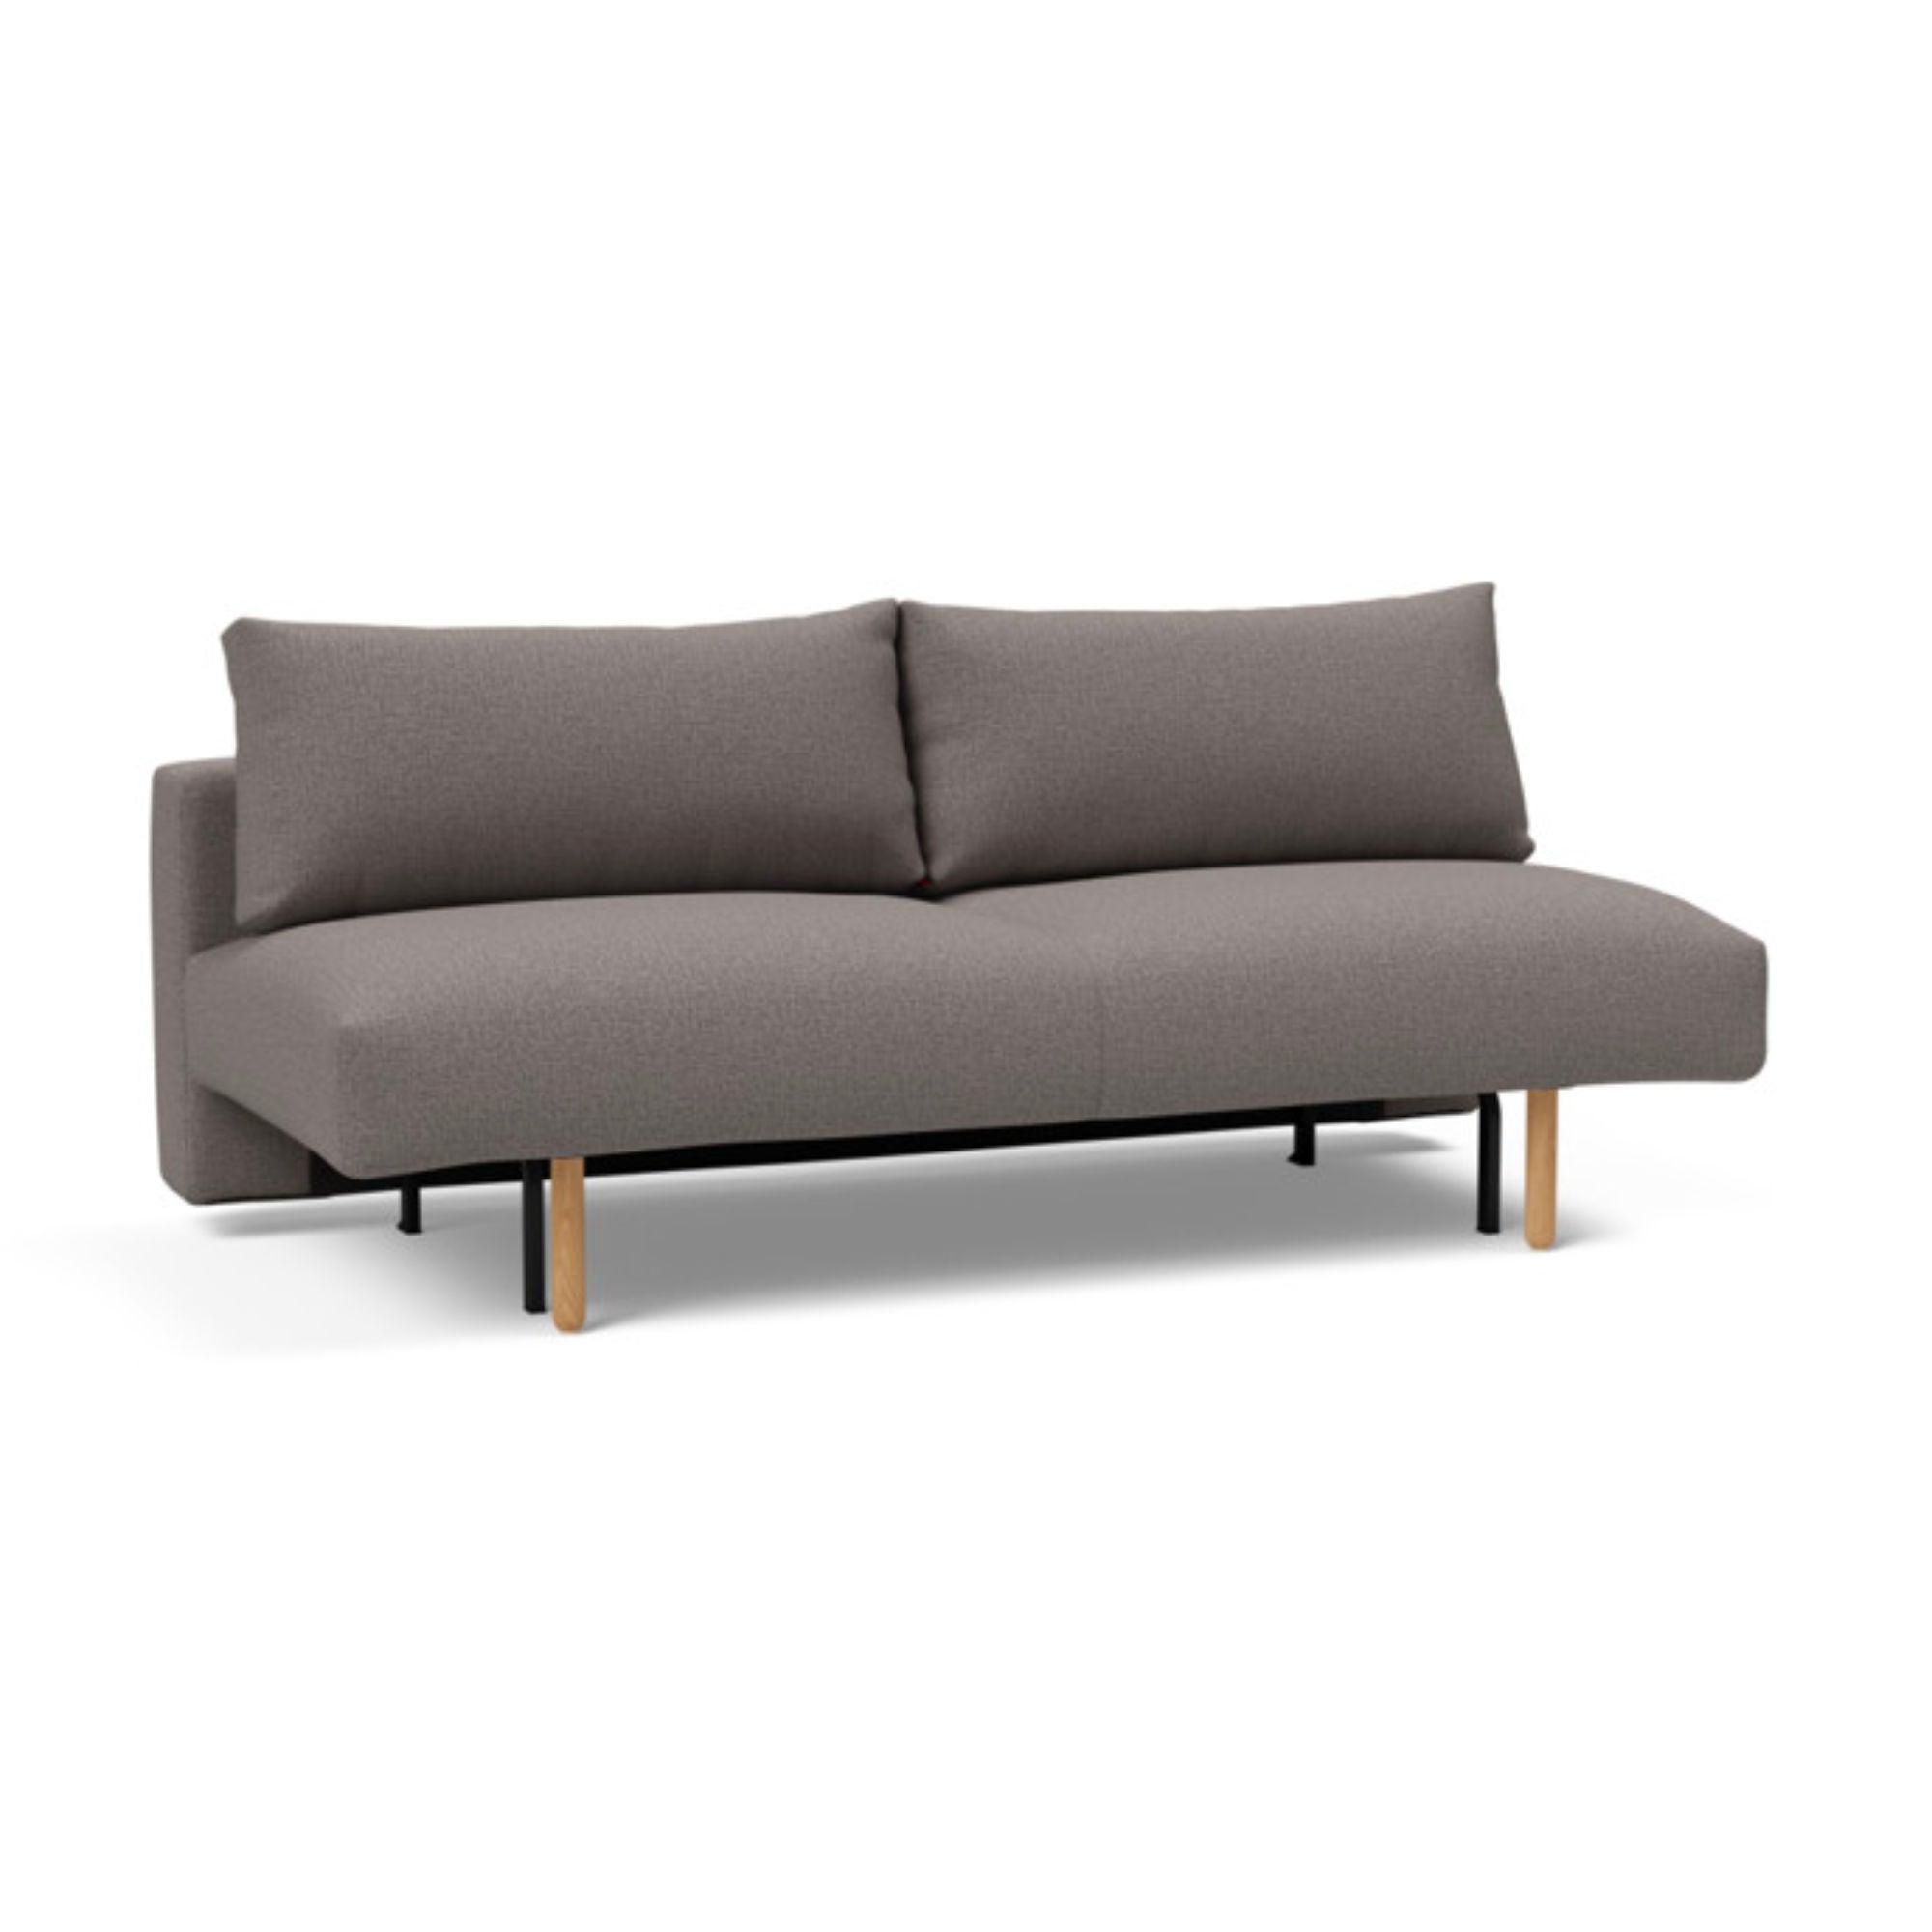 Innovation Living Frode Sofabed, 521MixedDanceGrey w200xd105xh83cm